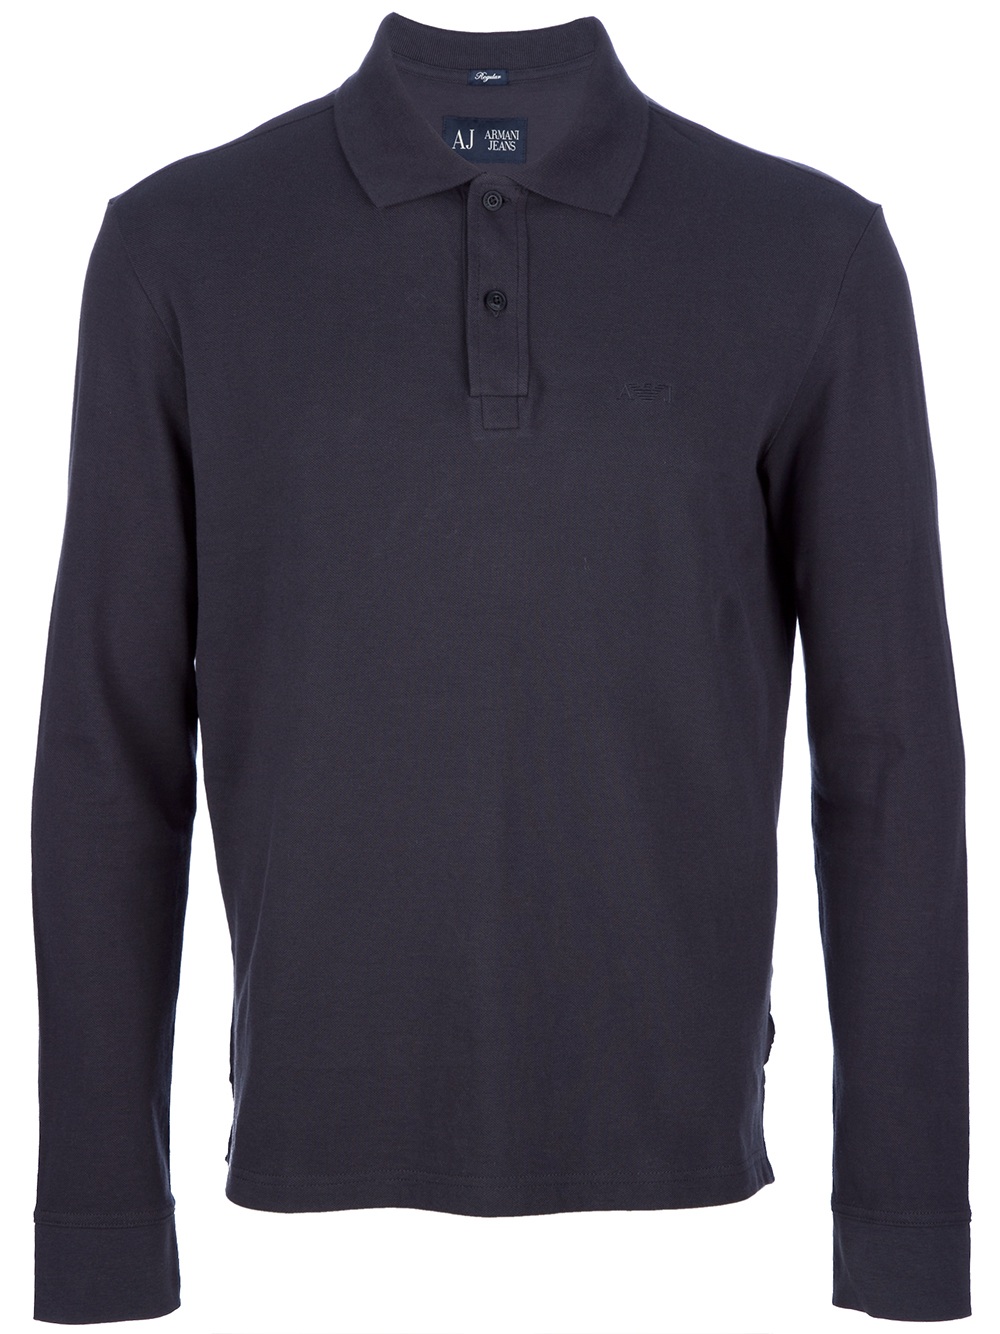 Armani Jeans Long Sleeve Polo Shirt in Navy (Blue) for Men - Lyst